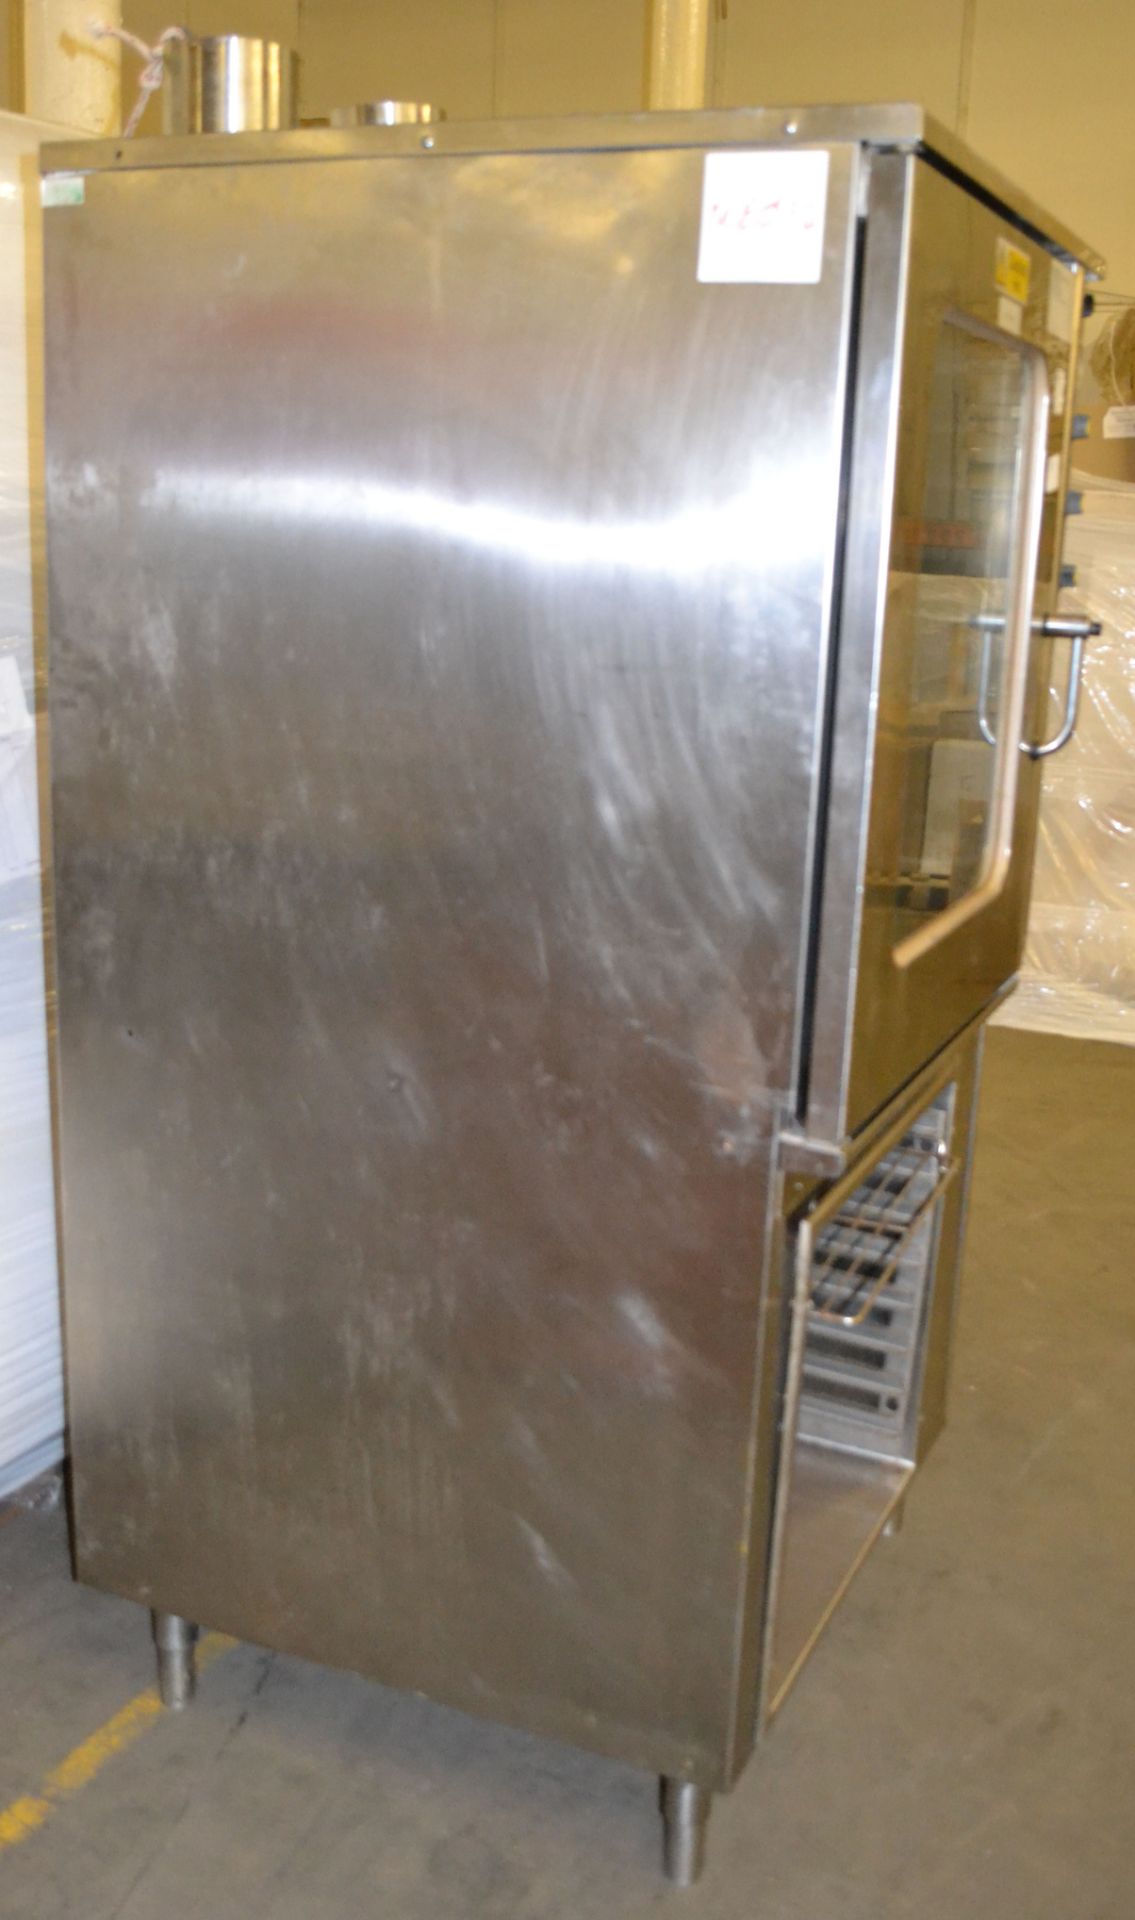 1 x Lainox MG110M LX Type Combination Oven with Pan Capacity - Ref:NCE032 - CL007 - Location: Bolton - Image 6 of 15